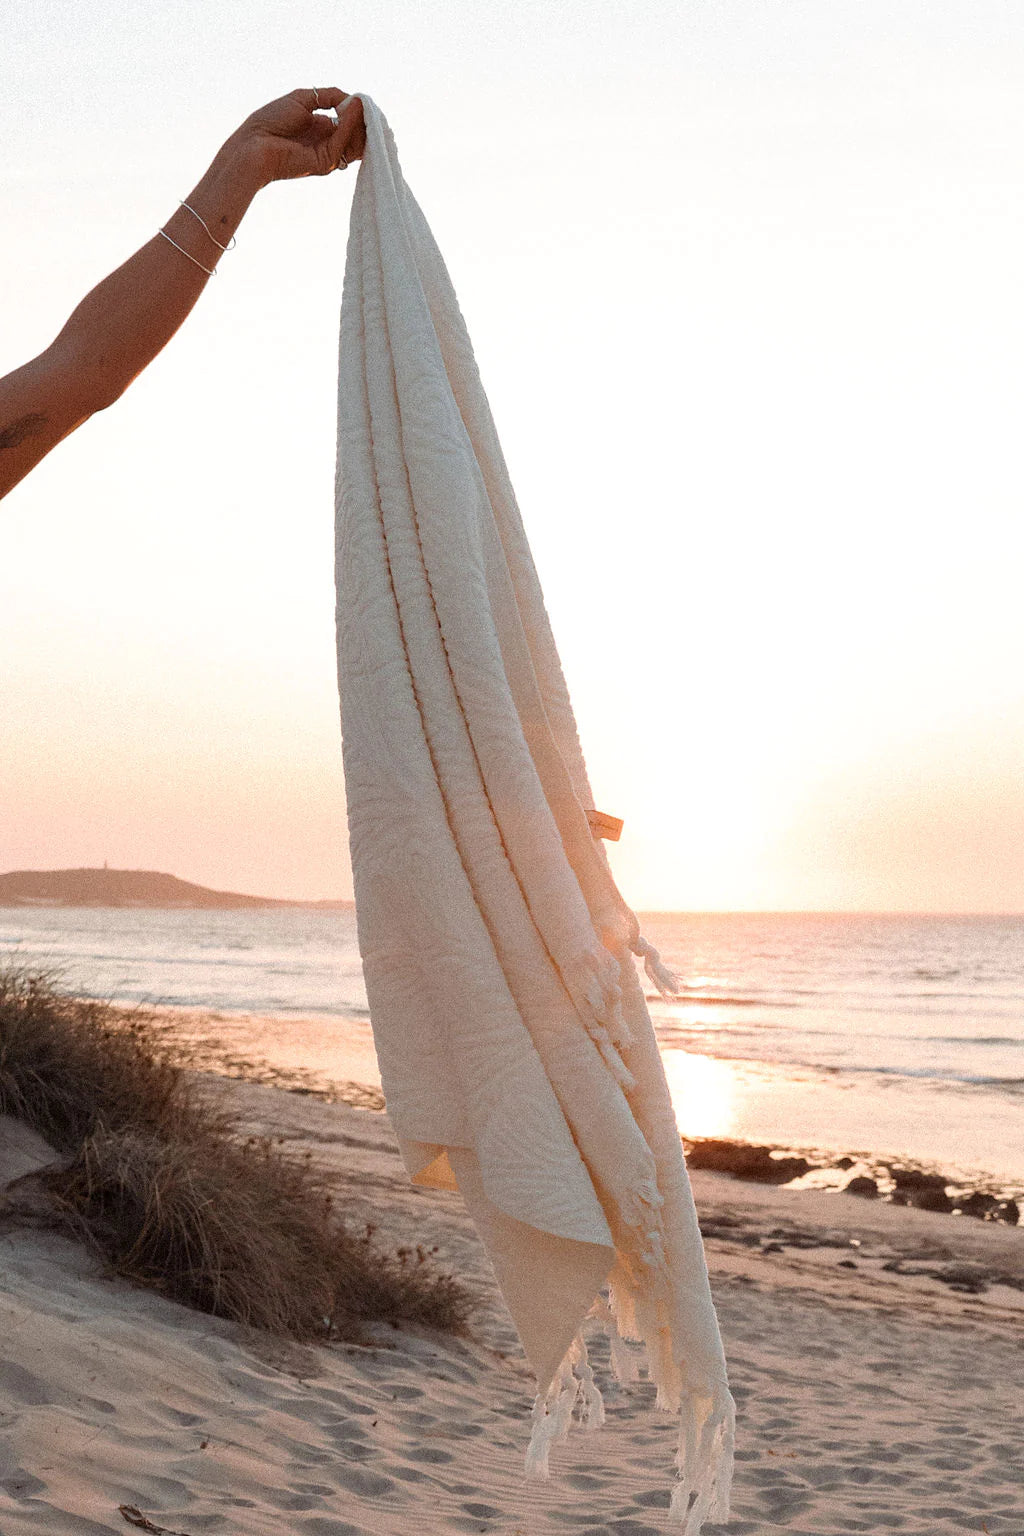 Salty Shadows Traveller Cotton Terry Towel